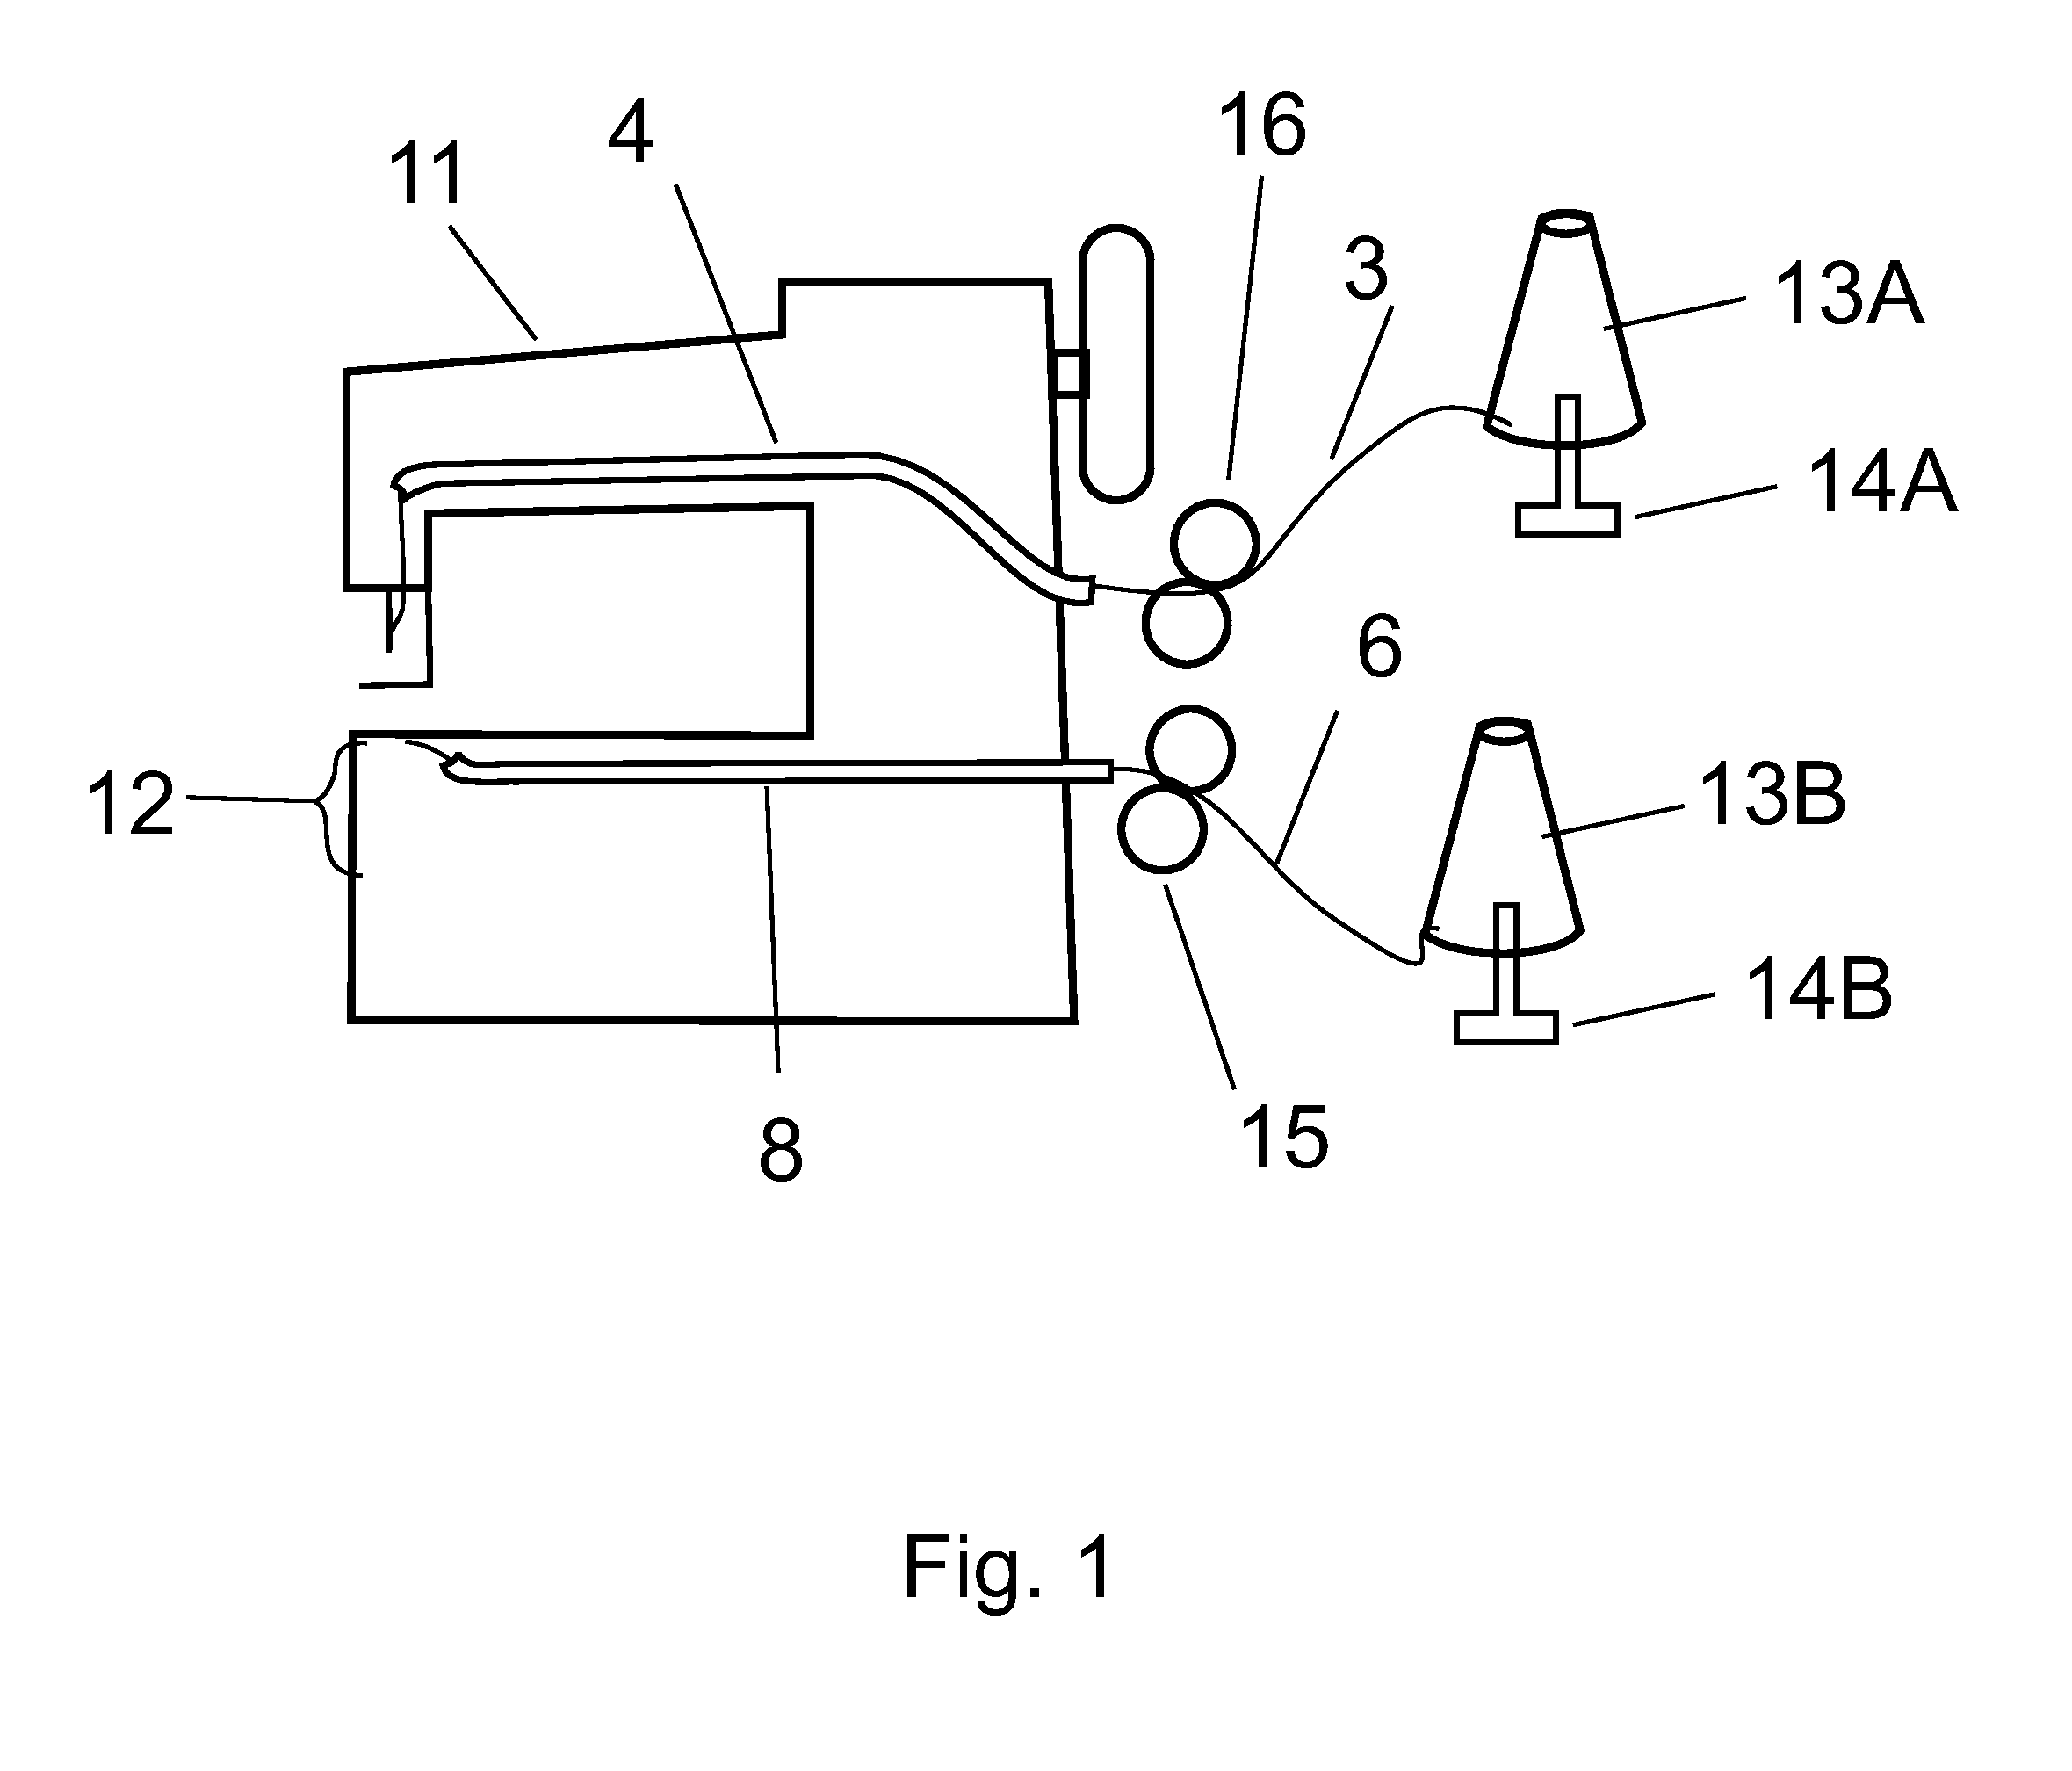 Stitching apparatus and method of use